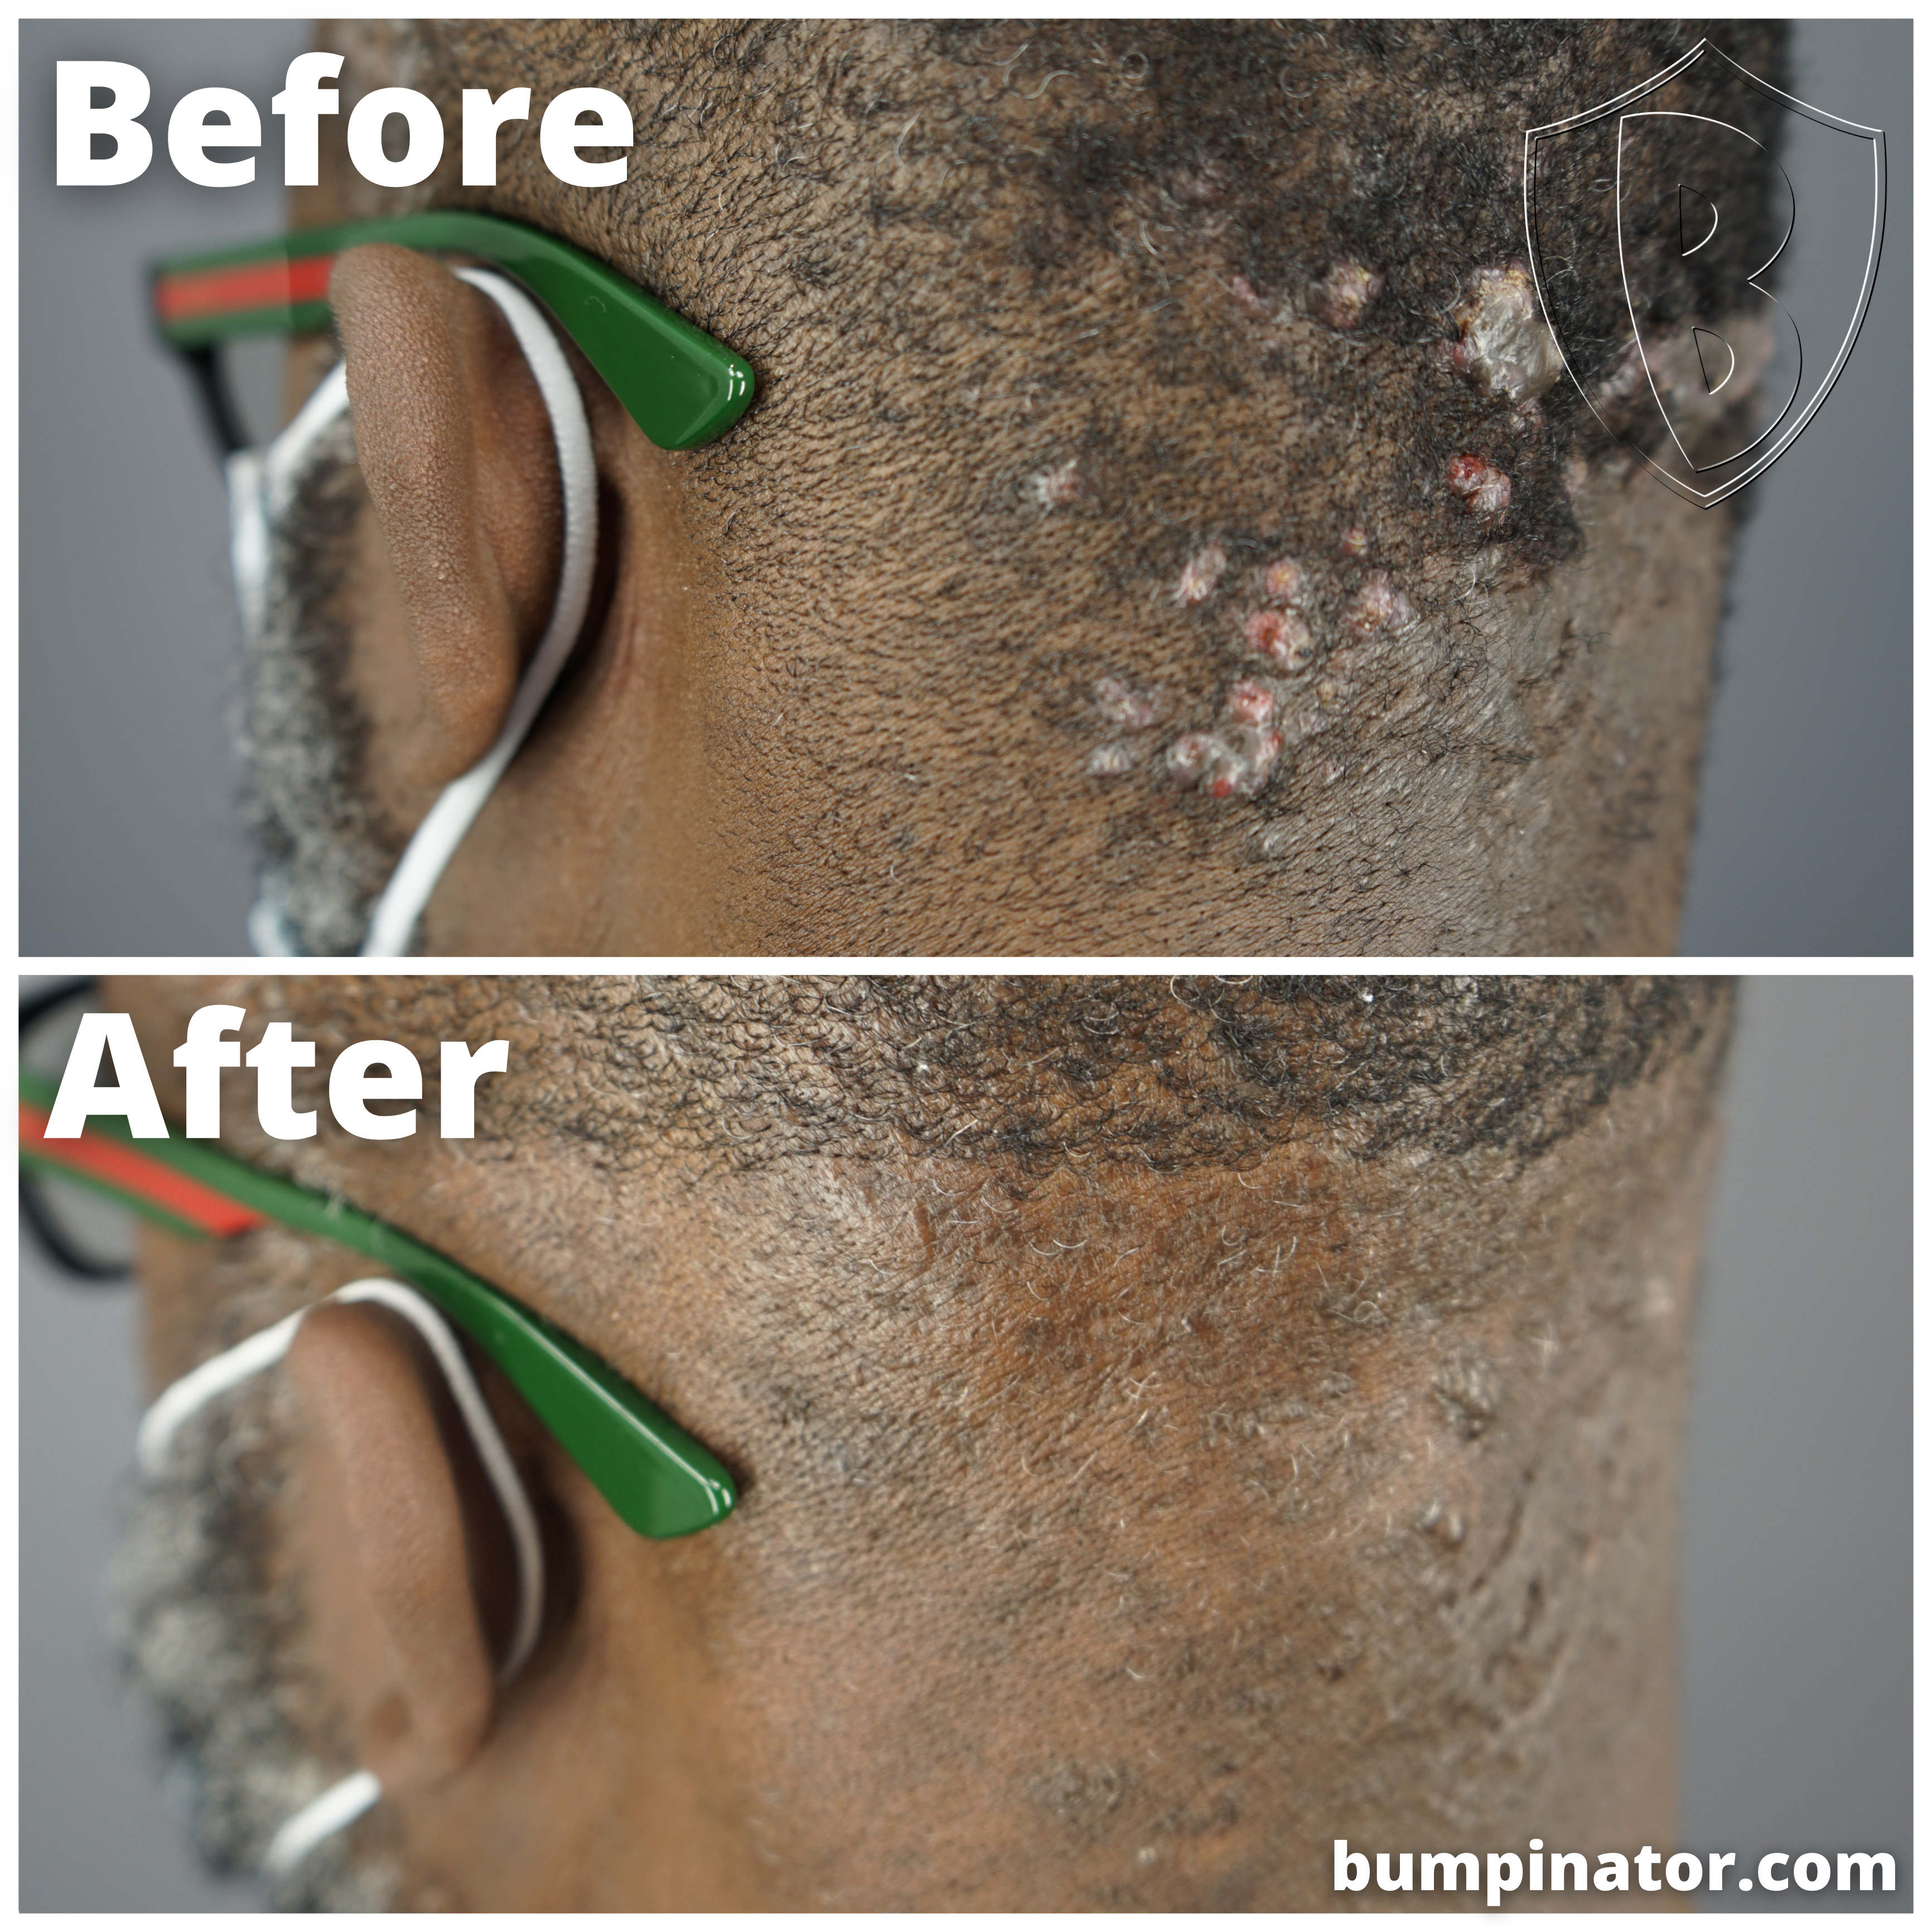 Small AKN Bumps Removal, post surgery picture results. Before & After Laser Surgery Removal Results.